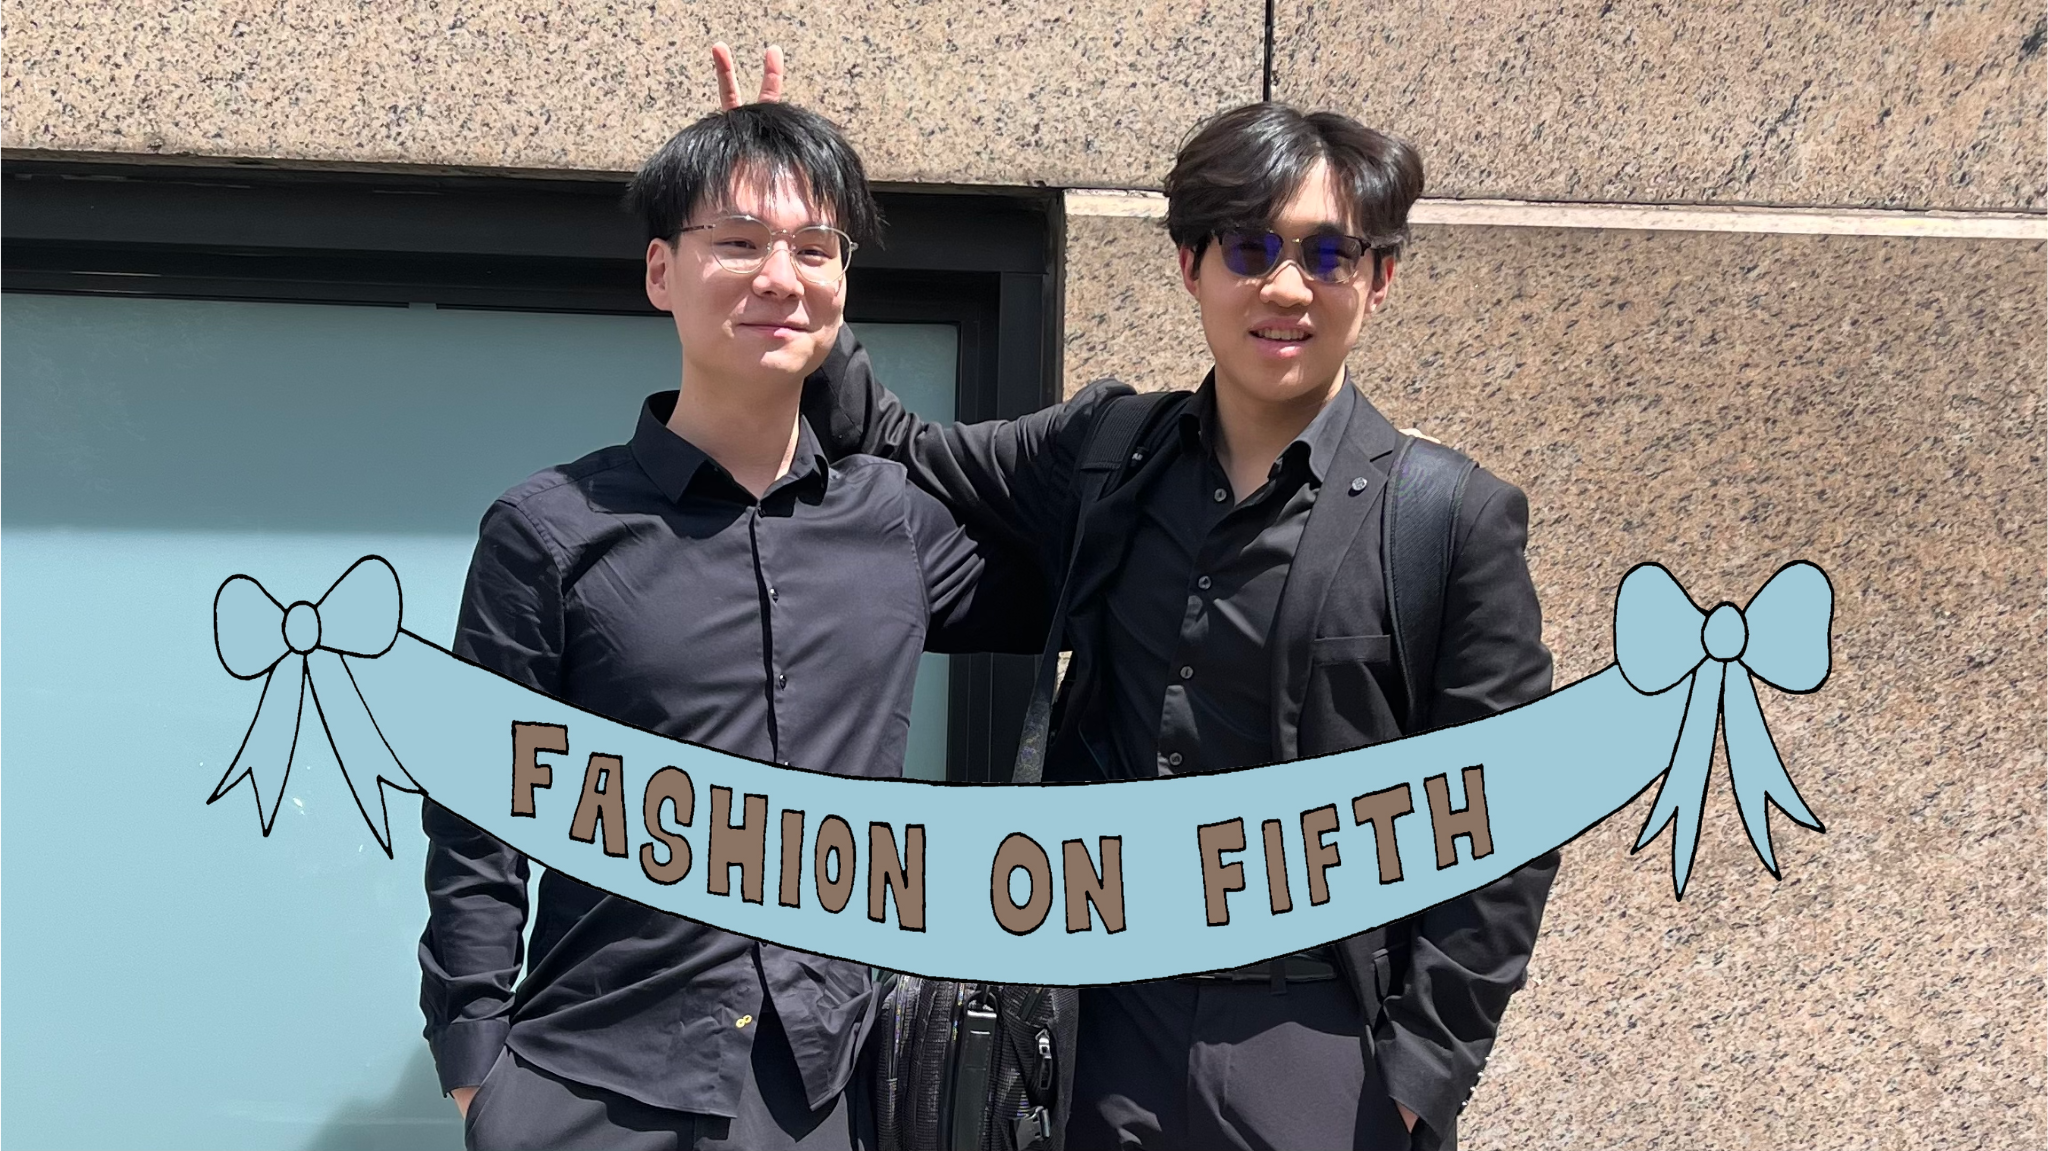 Two students stand next to each other in all-black outfits, one student makes peace sign bunny ears behind the other one’s head.